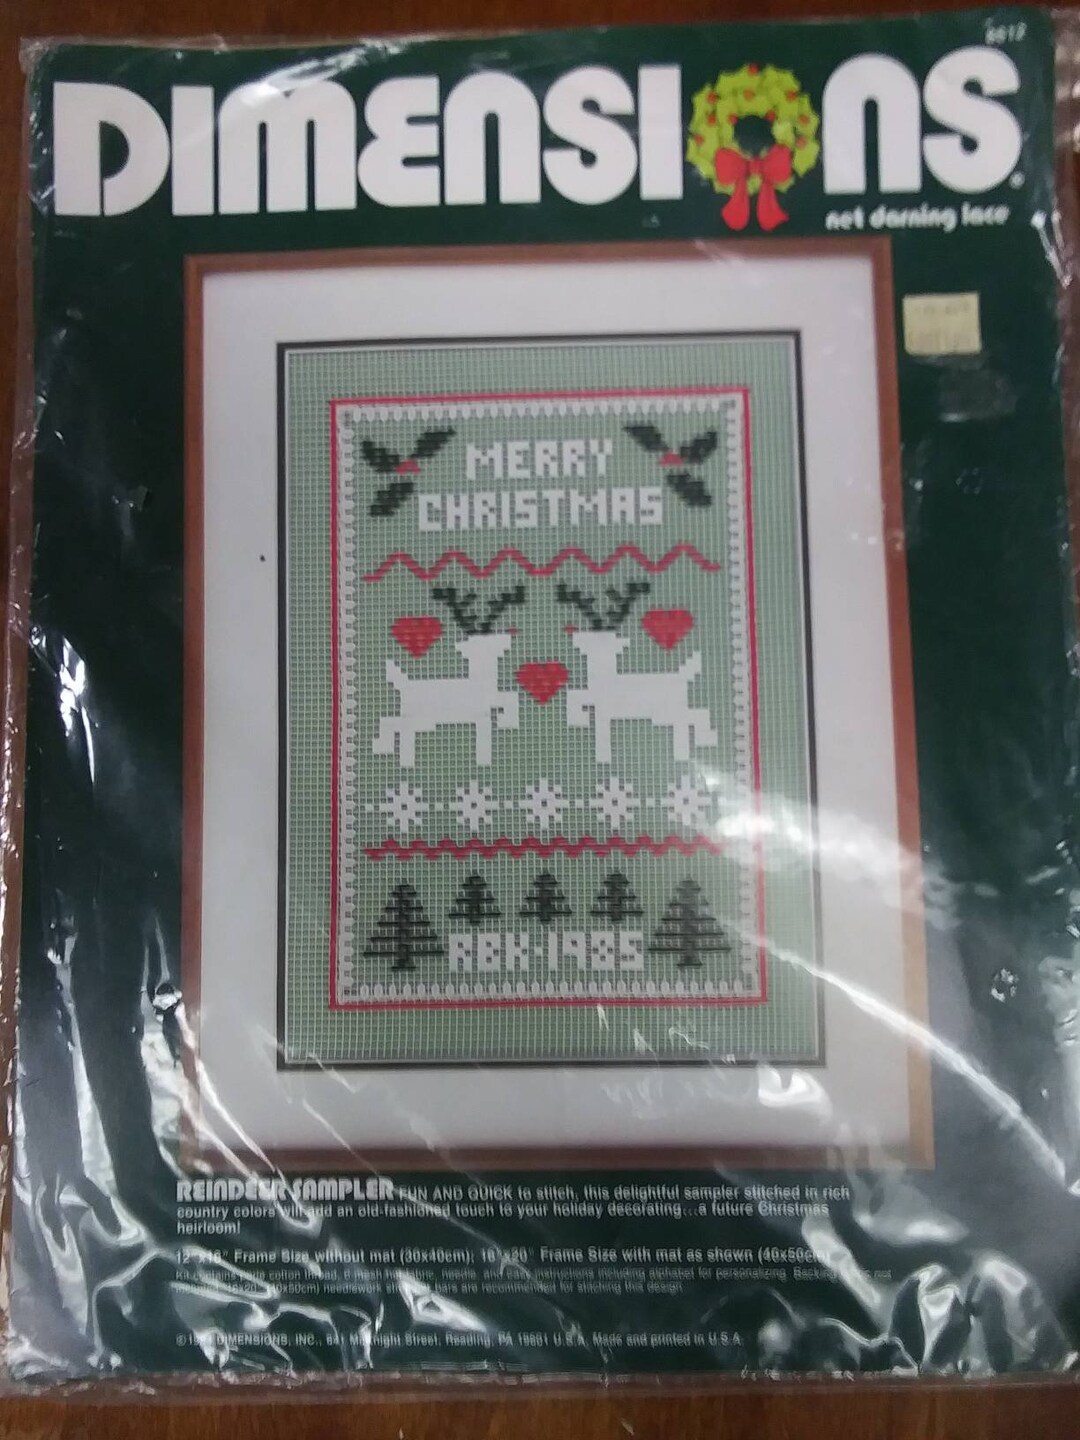 Dimensions Counted Cross Stitch Kit - Christmas Jar Ornaments